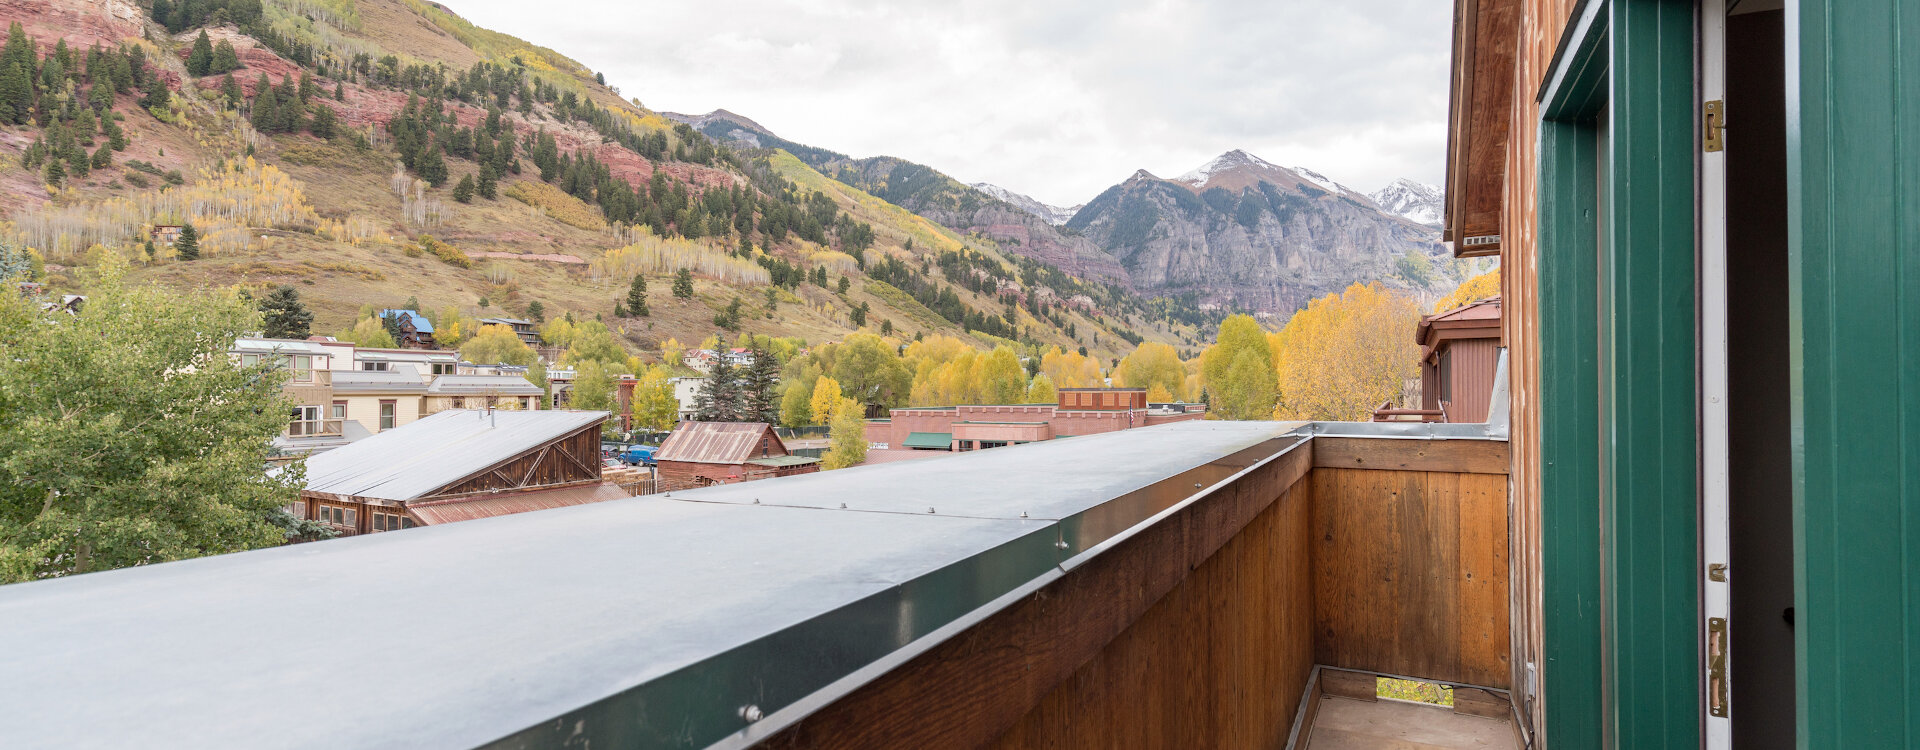 6-Telluride-Pacific-Place-Master-Deck-Web